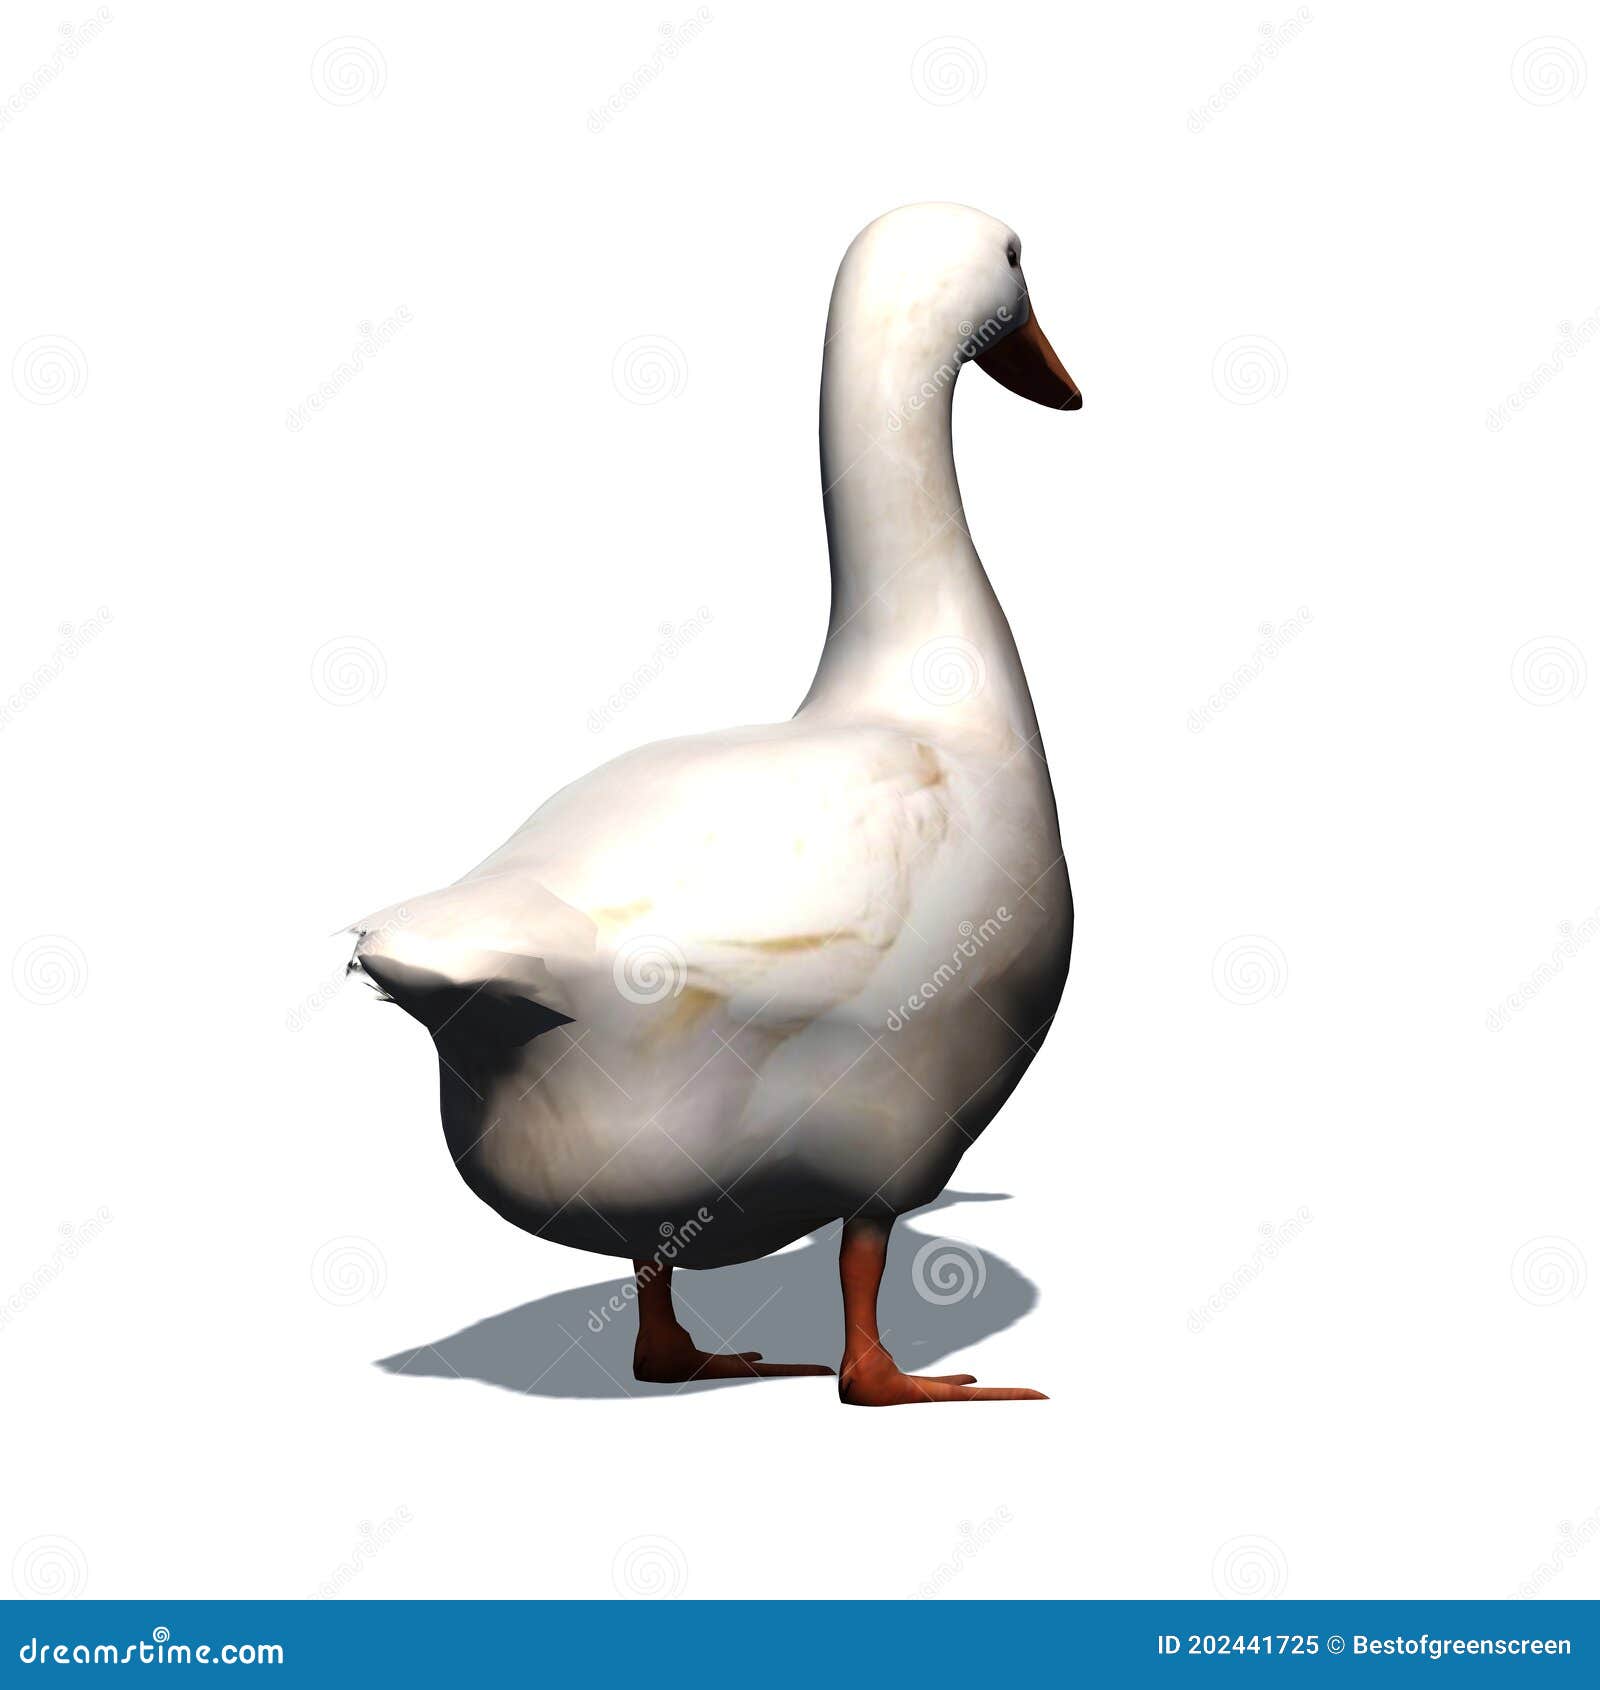 Farm Animals - White Goose with Shadow on the Floor - Isolated on White ...